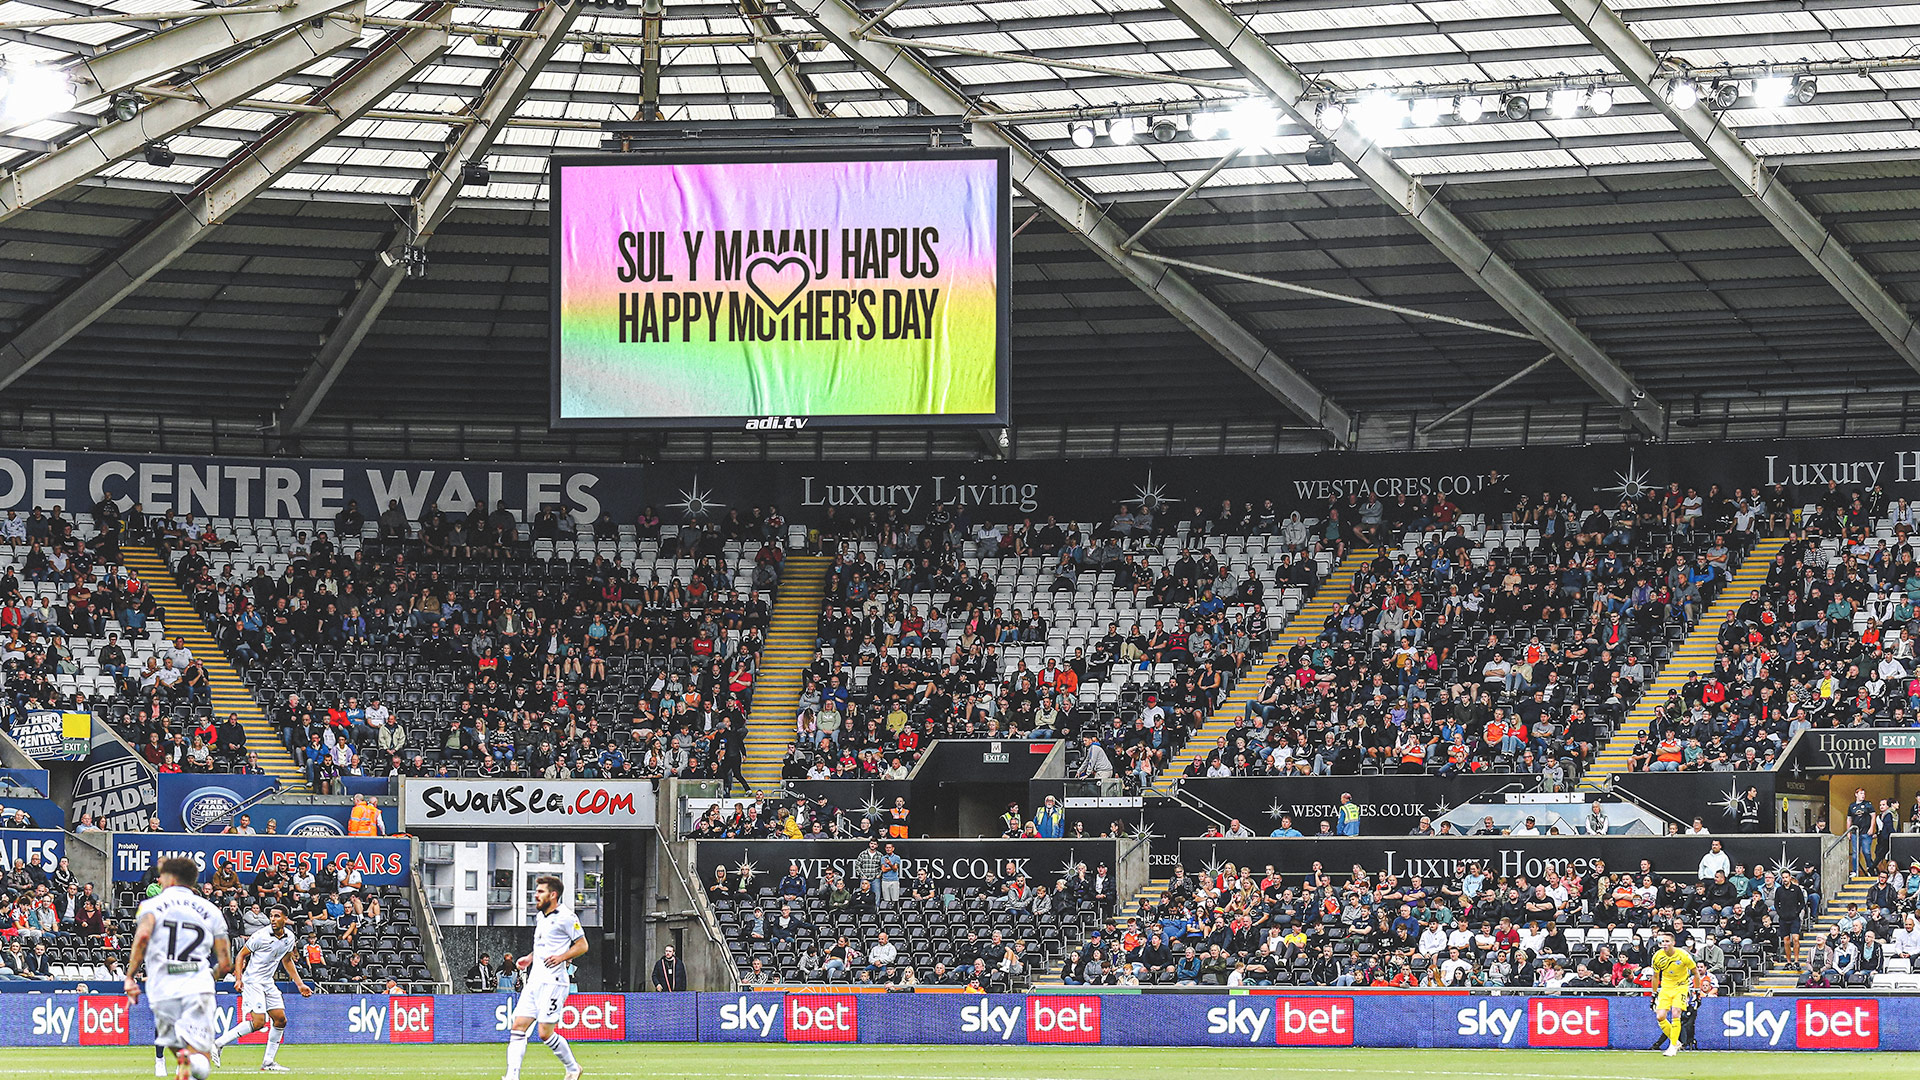 Mother's Day message on big screen at the Swansea.com Stadium 